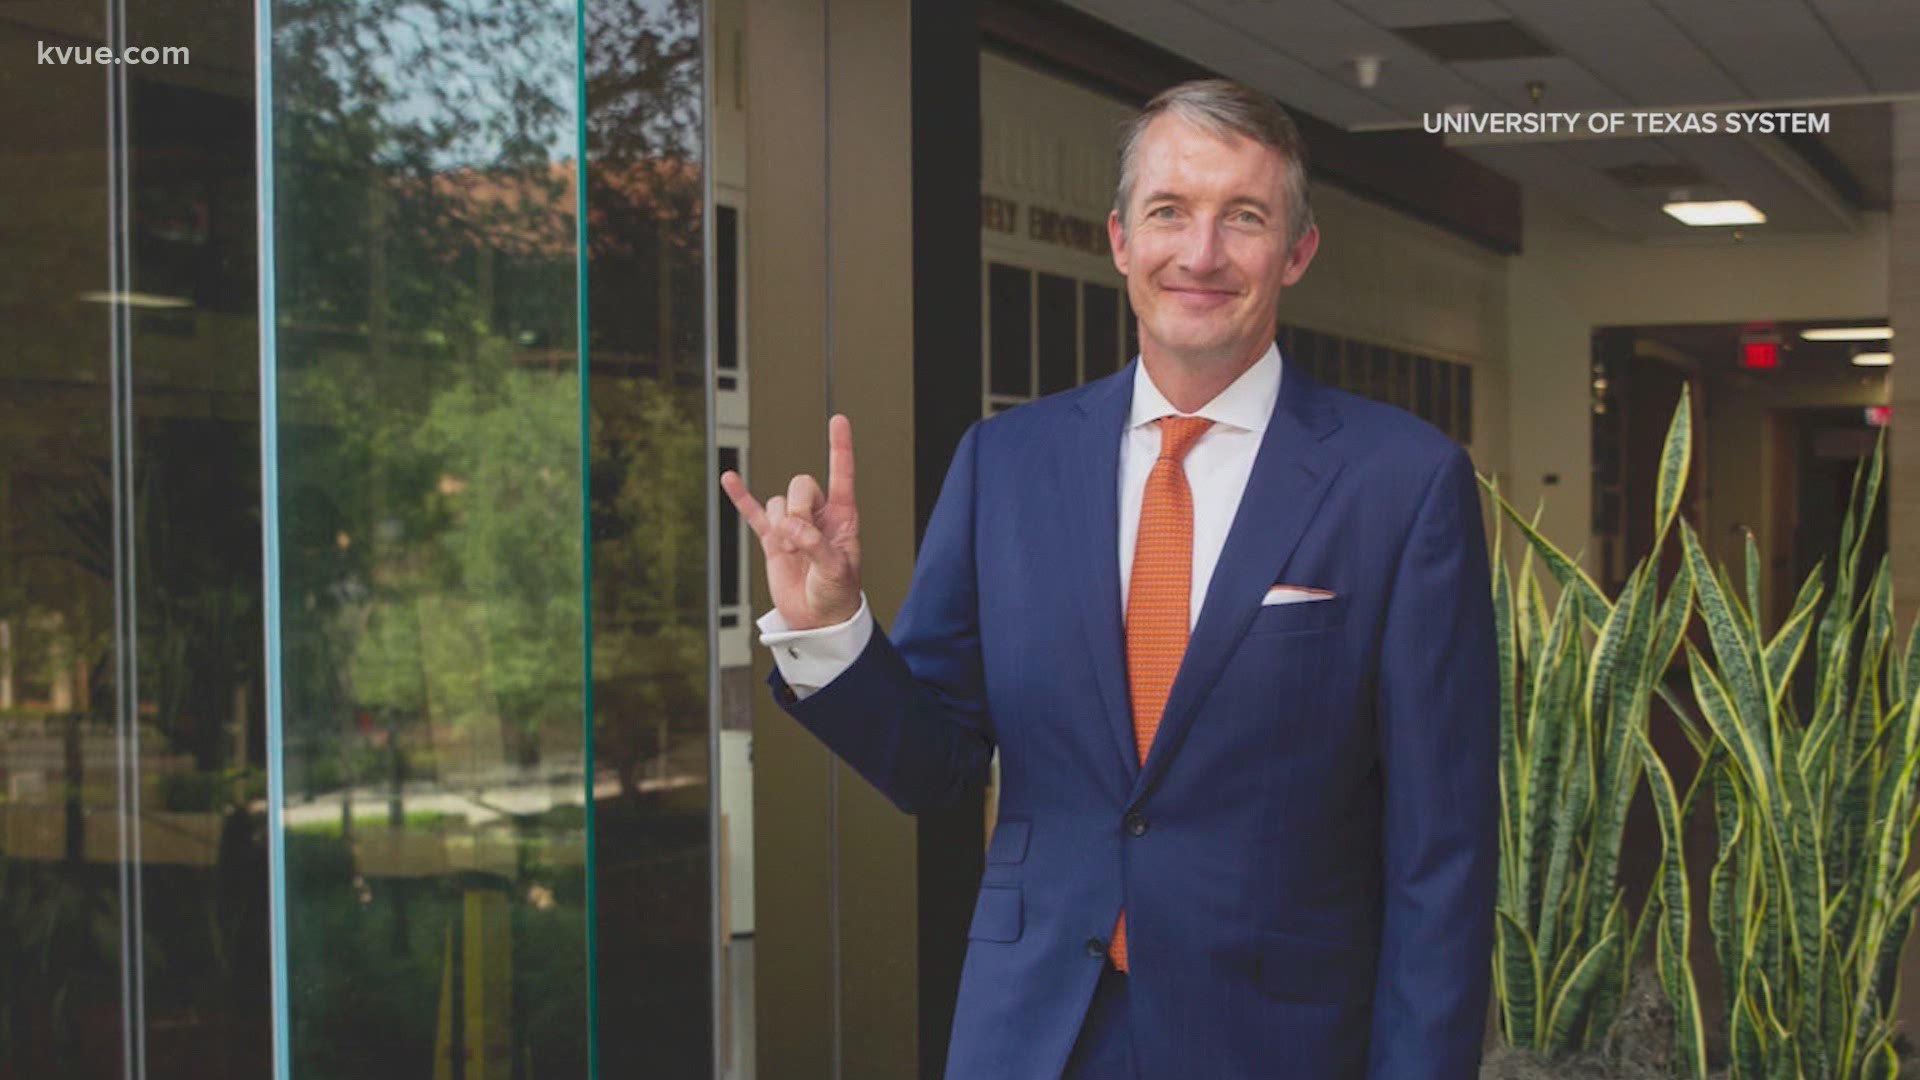 UT Austin's new president Jay Hartzell is expected to make about $1.25 million per year.